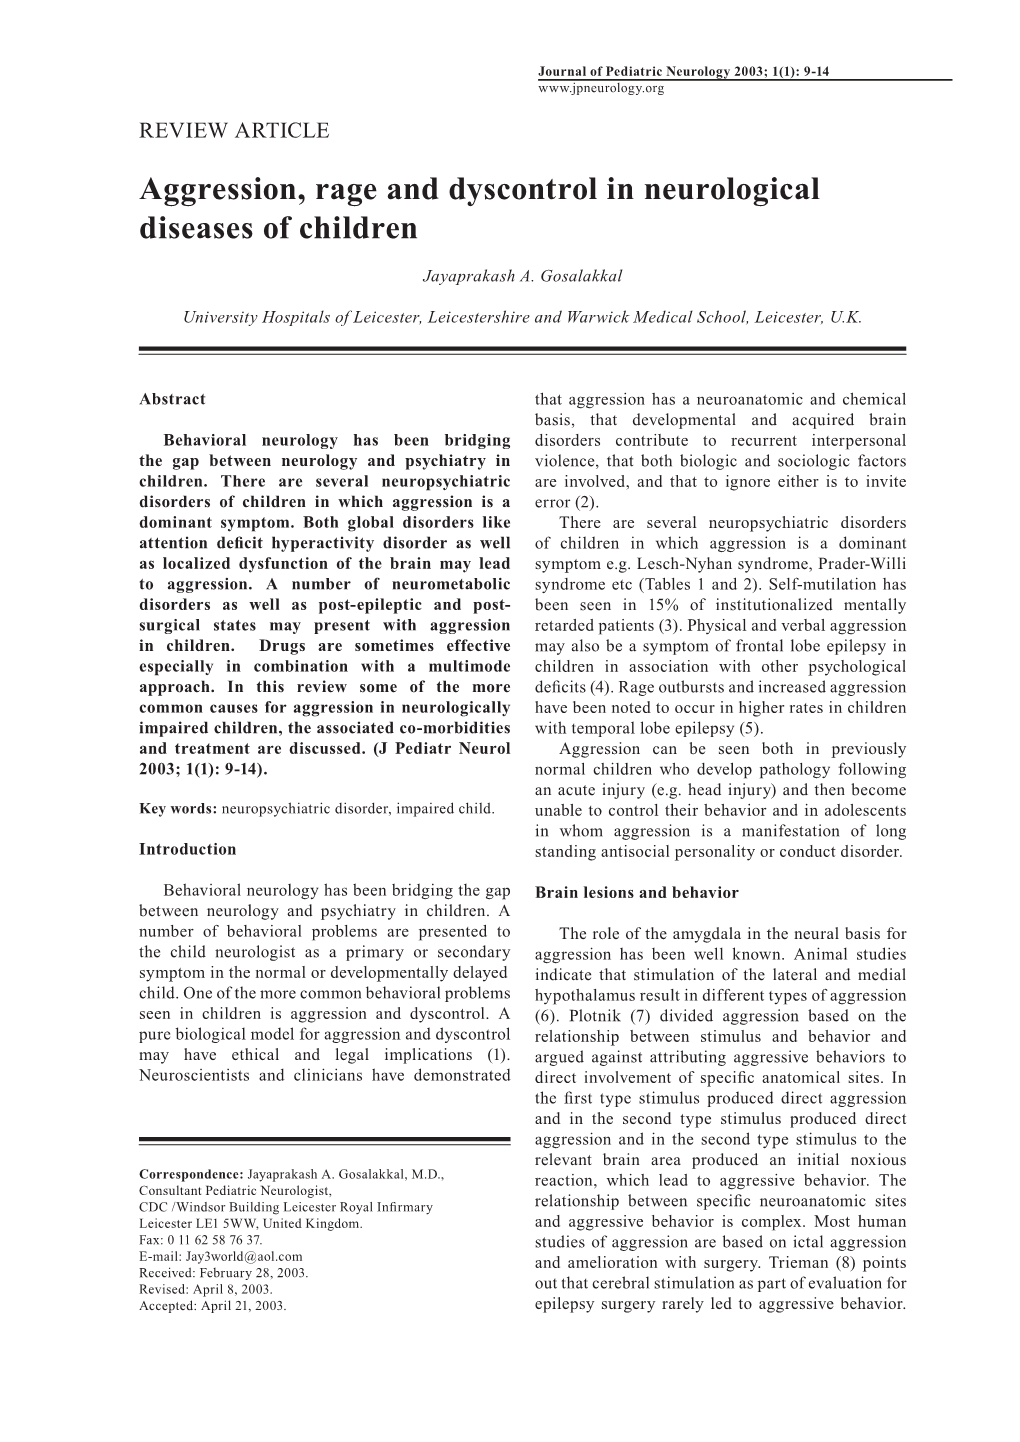 Aggression, Rage and Dyscontrol in Neurological Diseases of Children